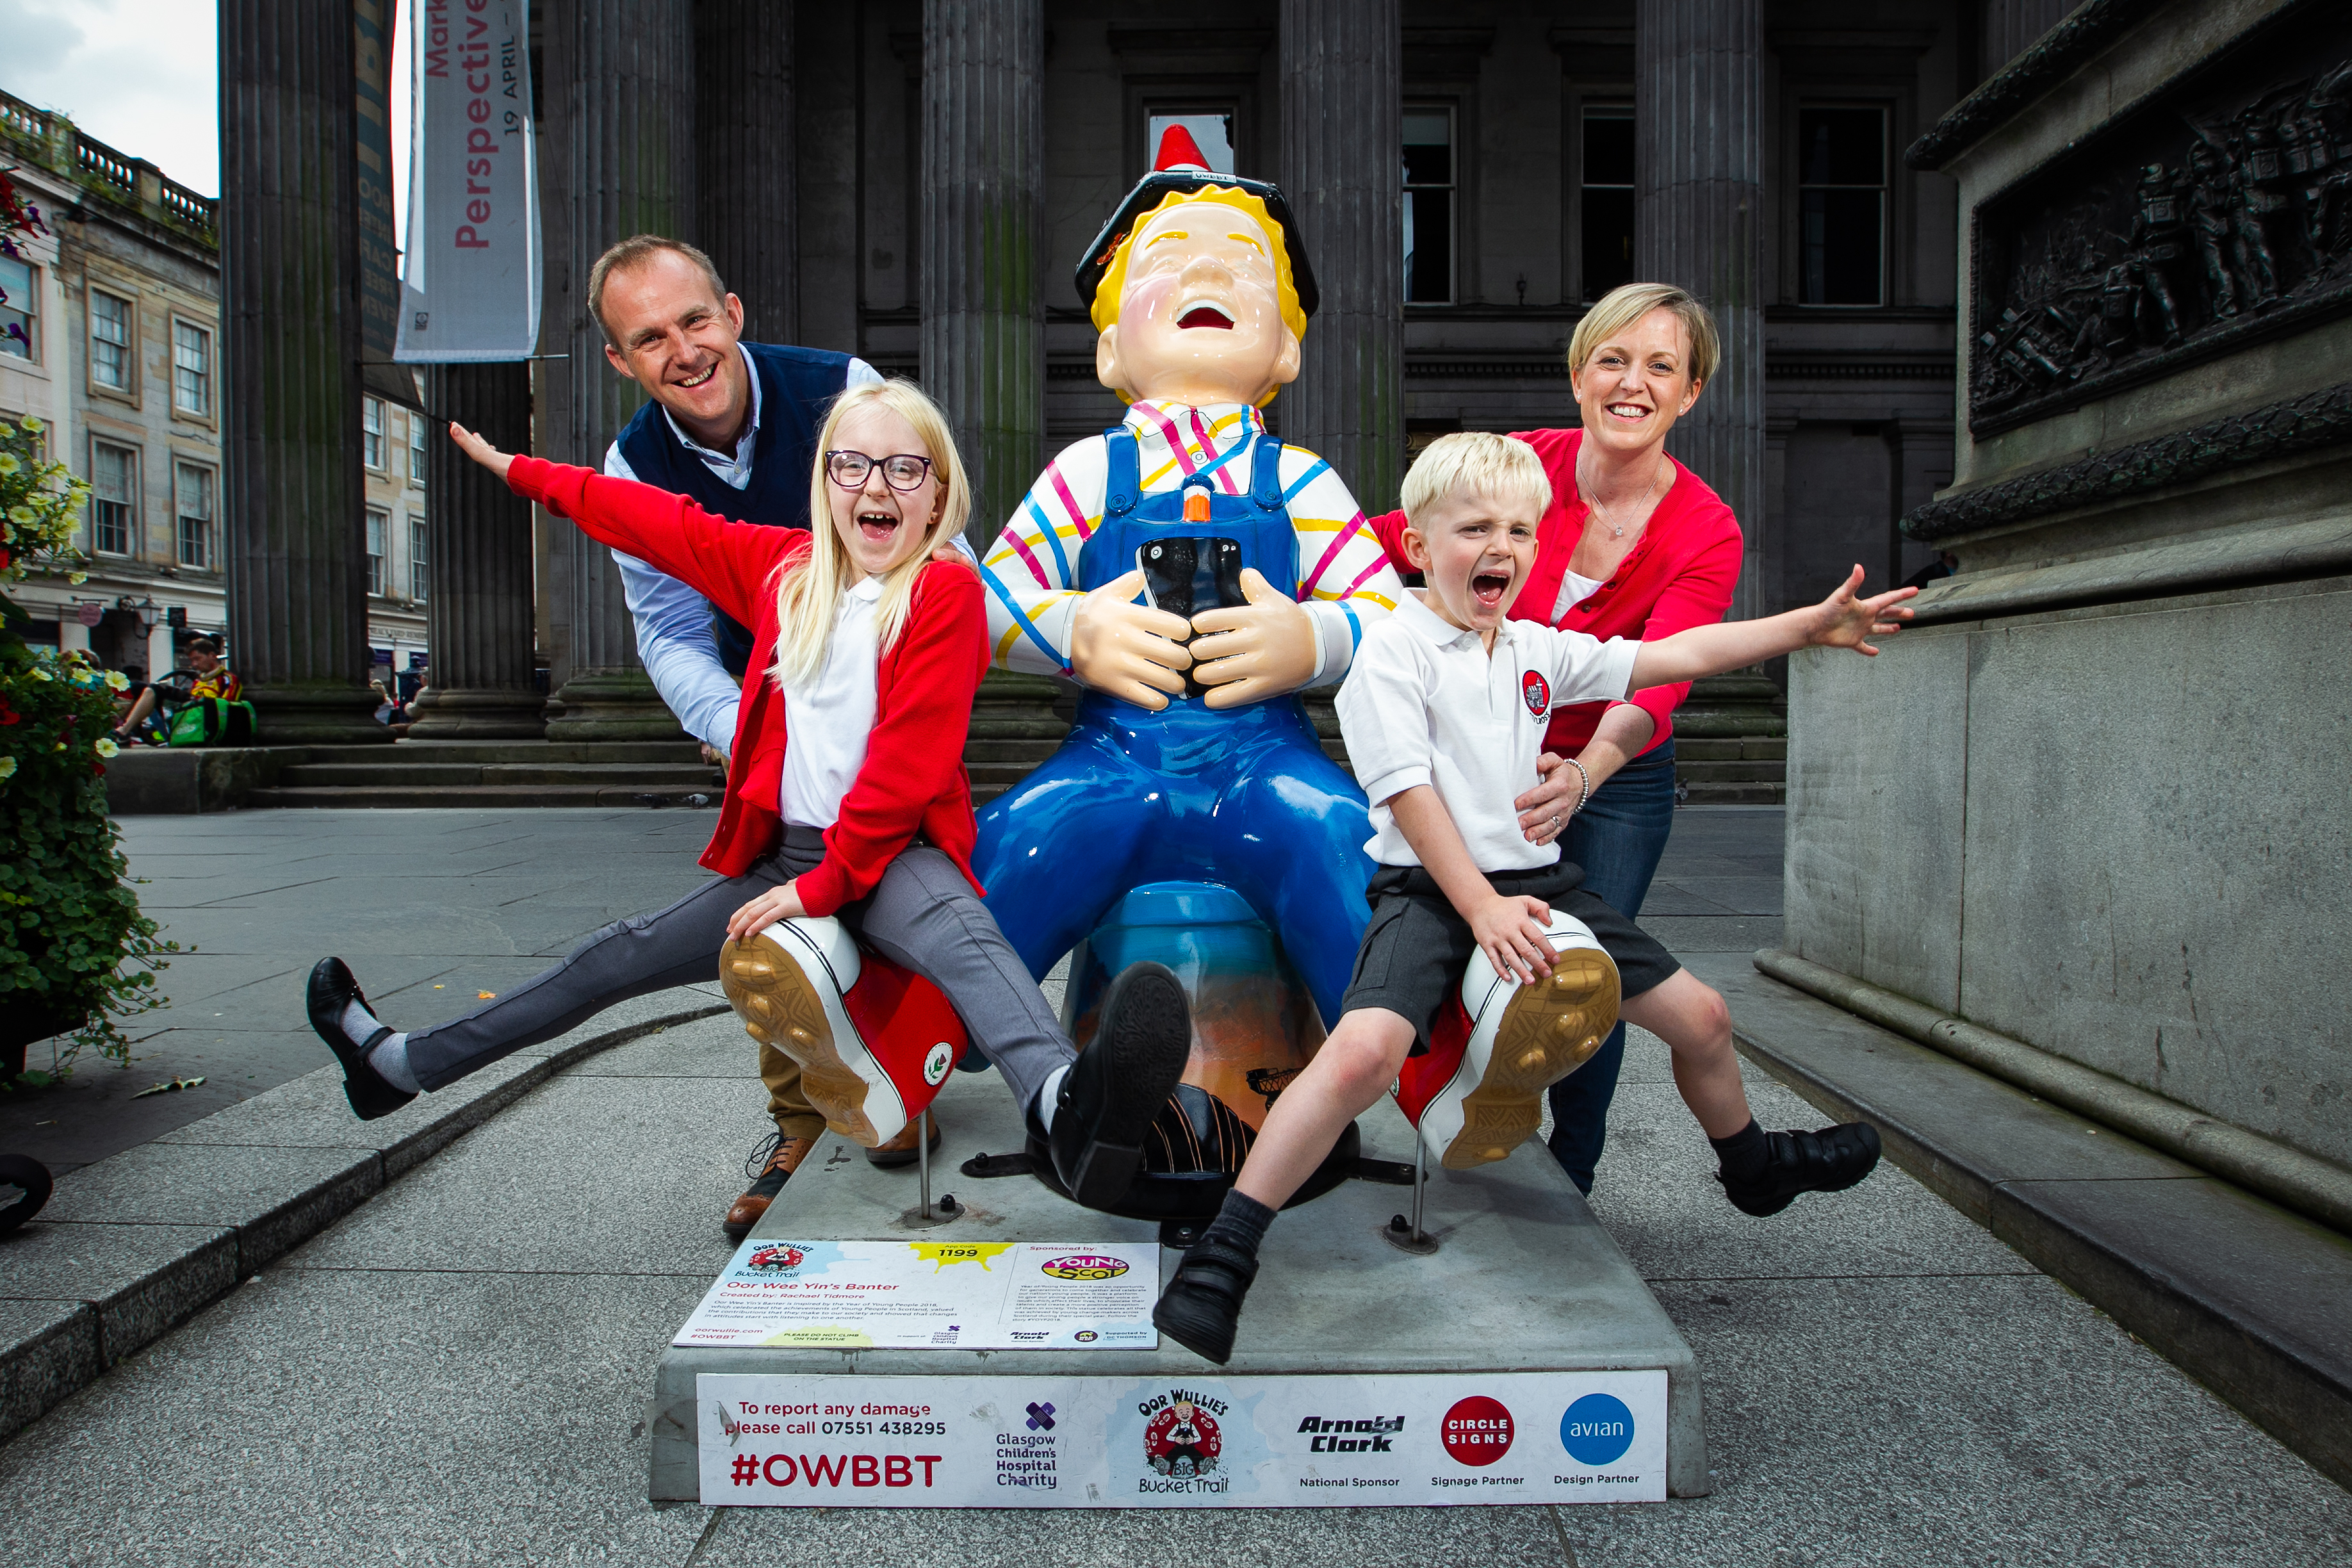 The Simpson Family; parents David and Kerry, with Eve (8), and Hamish (5), standing with the Oor Wullie statue in Royal Exchange Square, Glasgow. The family have spent the summer visiting every statue in Scotland as part of the Bucket Trail.